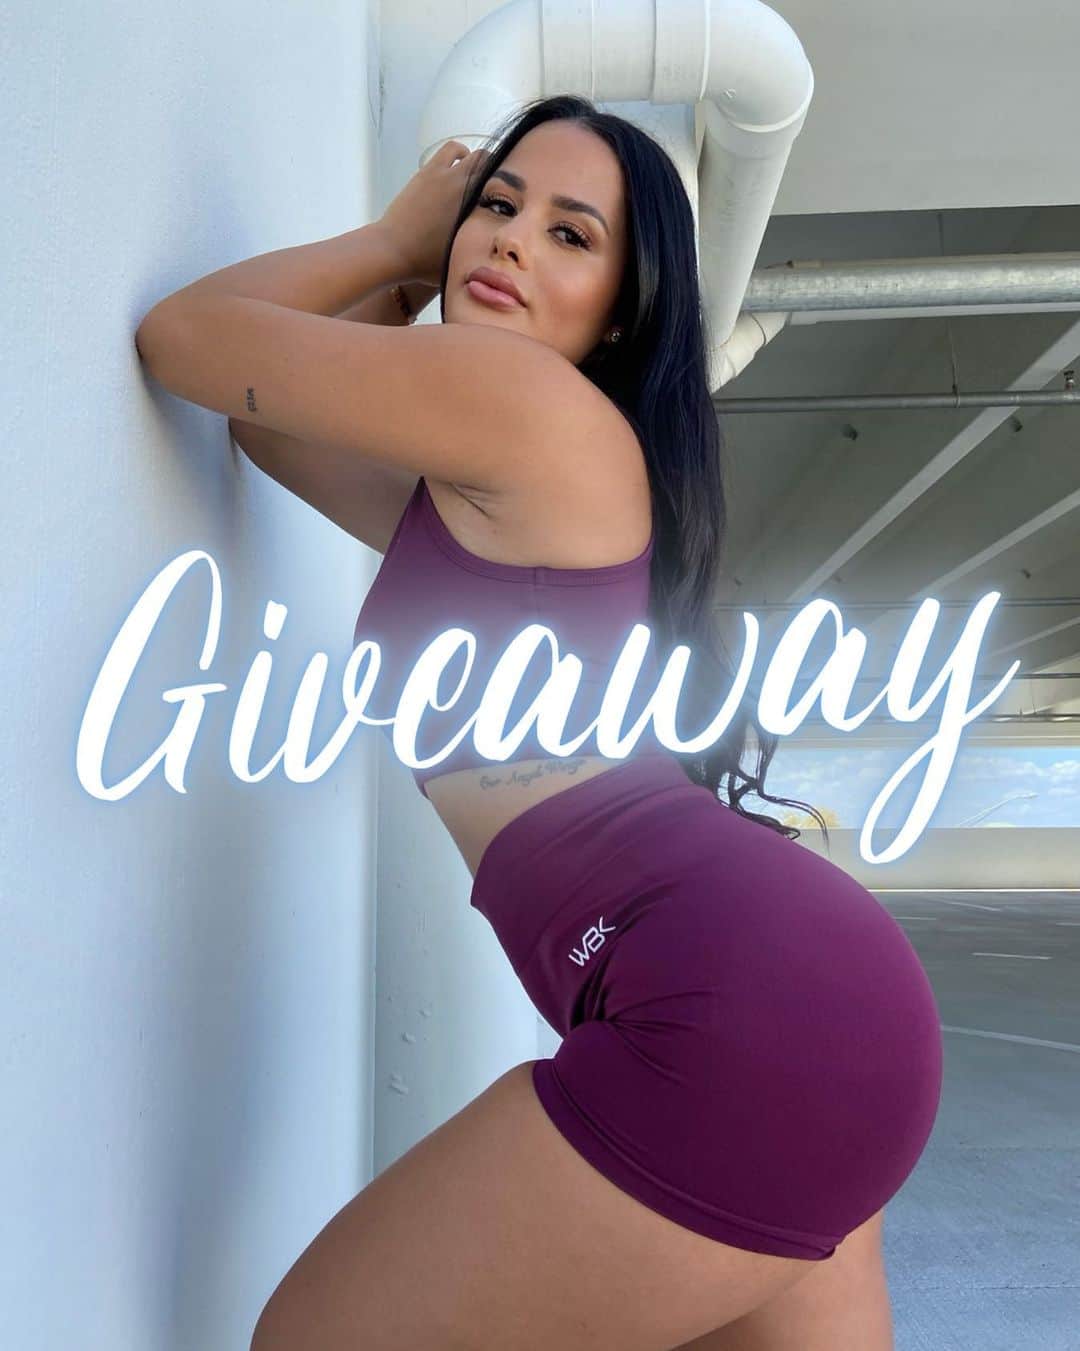 Katya Elise Henryのインスタグラム：「It's officially the first day of our 12D OF FITMAS! To celebrate, we're kicking it off with an exciting lil giveaway 👀 So... grab your BFF and WIN a spot in my 2023 60 DAY Challenge!  All you need to do is: 1️⃣ GUESS the name of our 2023 challenge 😌 hint: it's 2 words! 2️⃣ TAG a BFF below!  Make sure you're following both @katyaelisehenry and @wbkfit! The more friends you tag, the more chances you have to win!  WINNERS ANNOUNCED IN 24 HOURS on @WBKFIT STORY! GOOD LUCK 🖤」